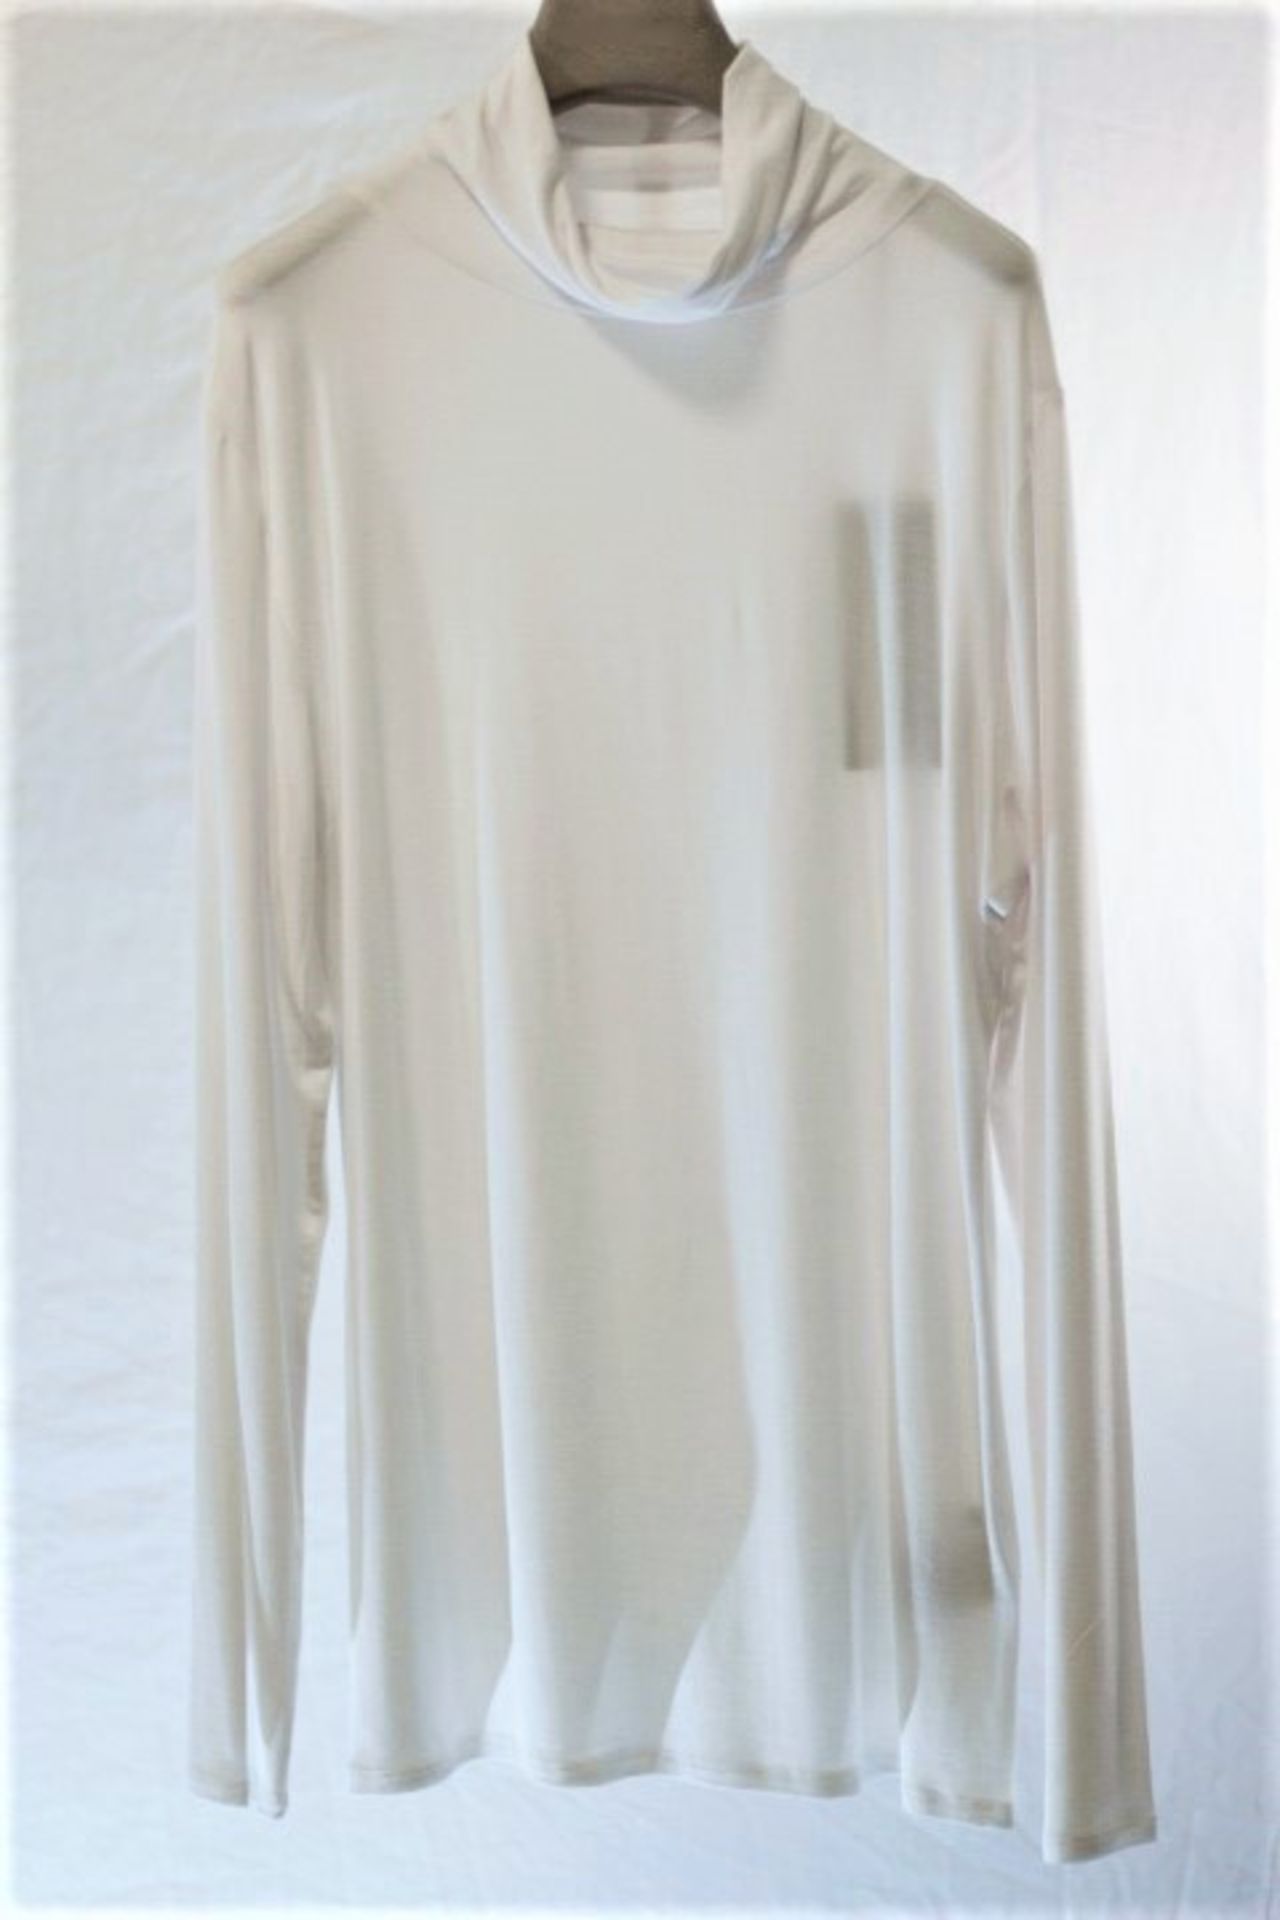 1 x Alpha Studio White Turtle Neck - Size: 18 - Material: 92% Viscose, 8% Elastane - From a High End